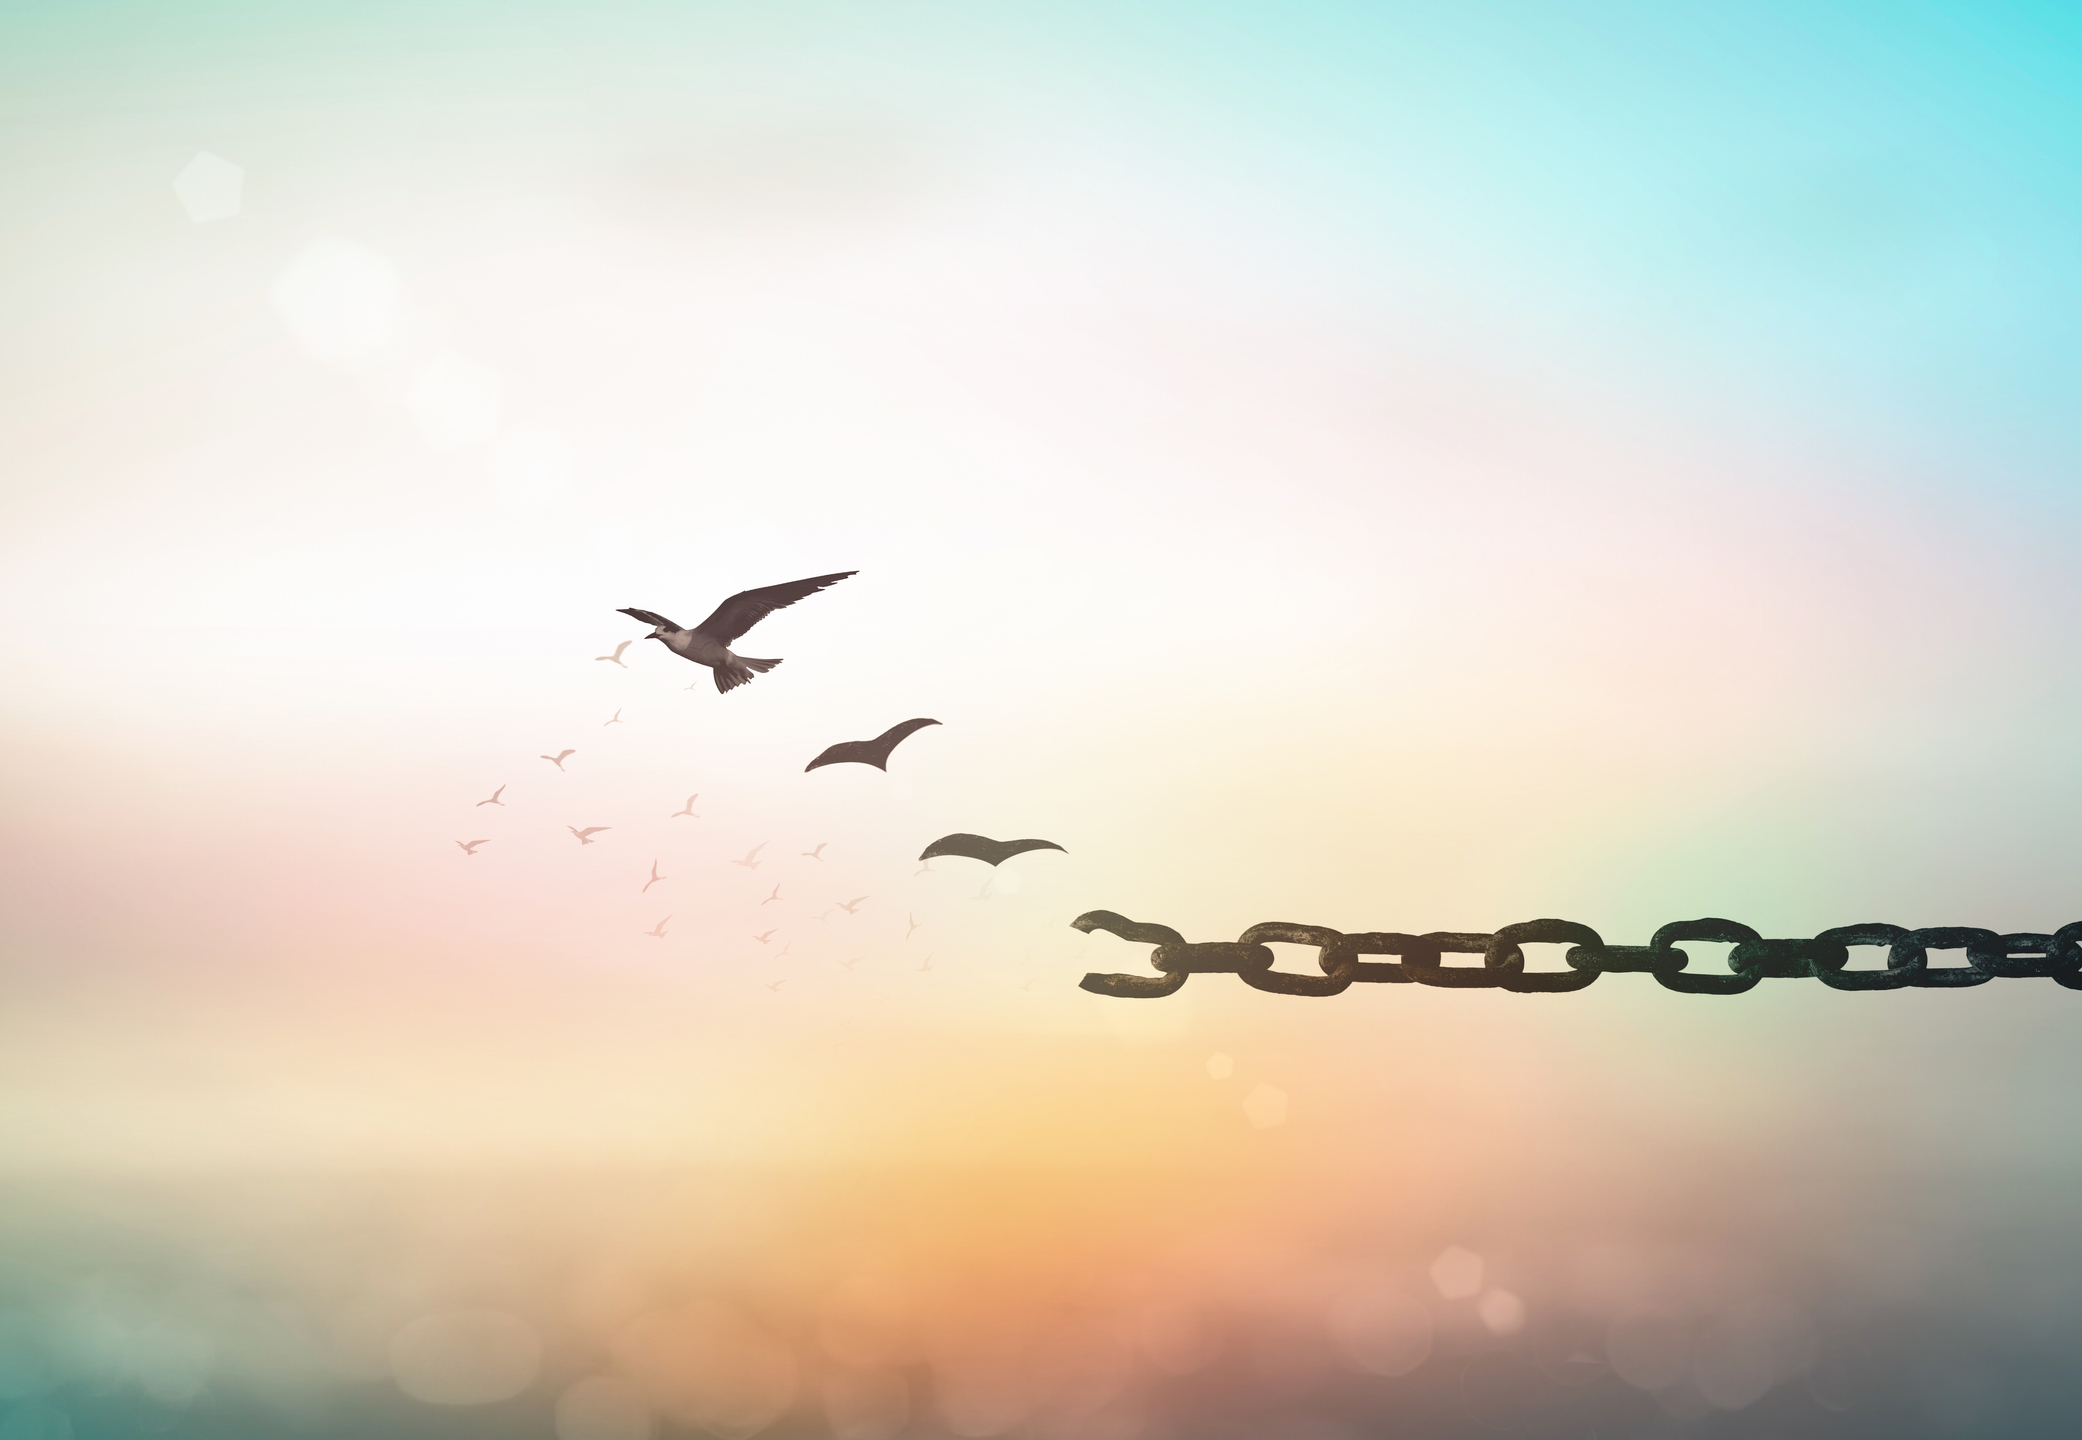 Silhouette of bird flying and broken chains at blurred sunset background